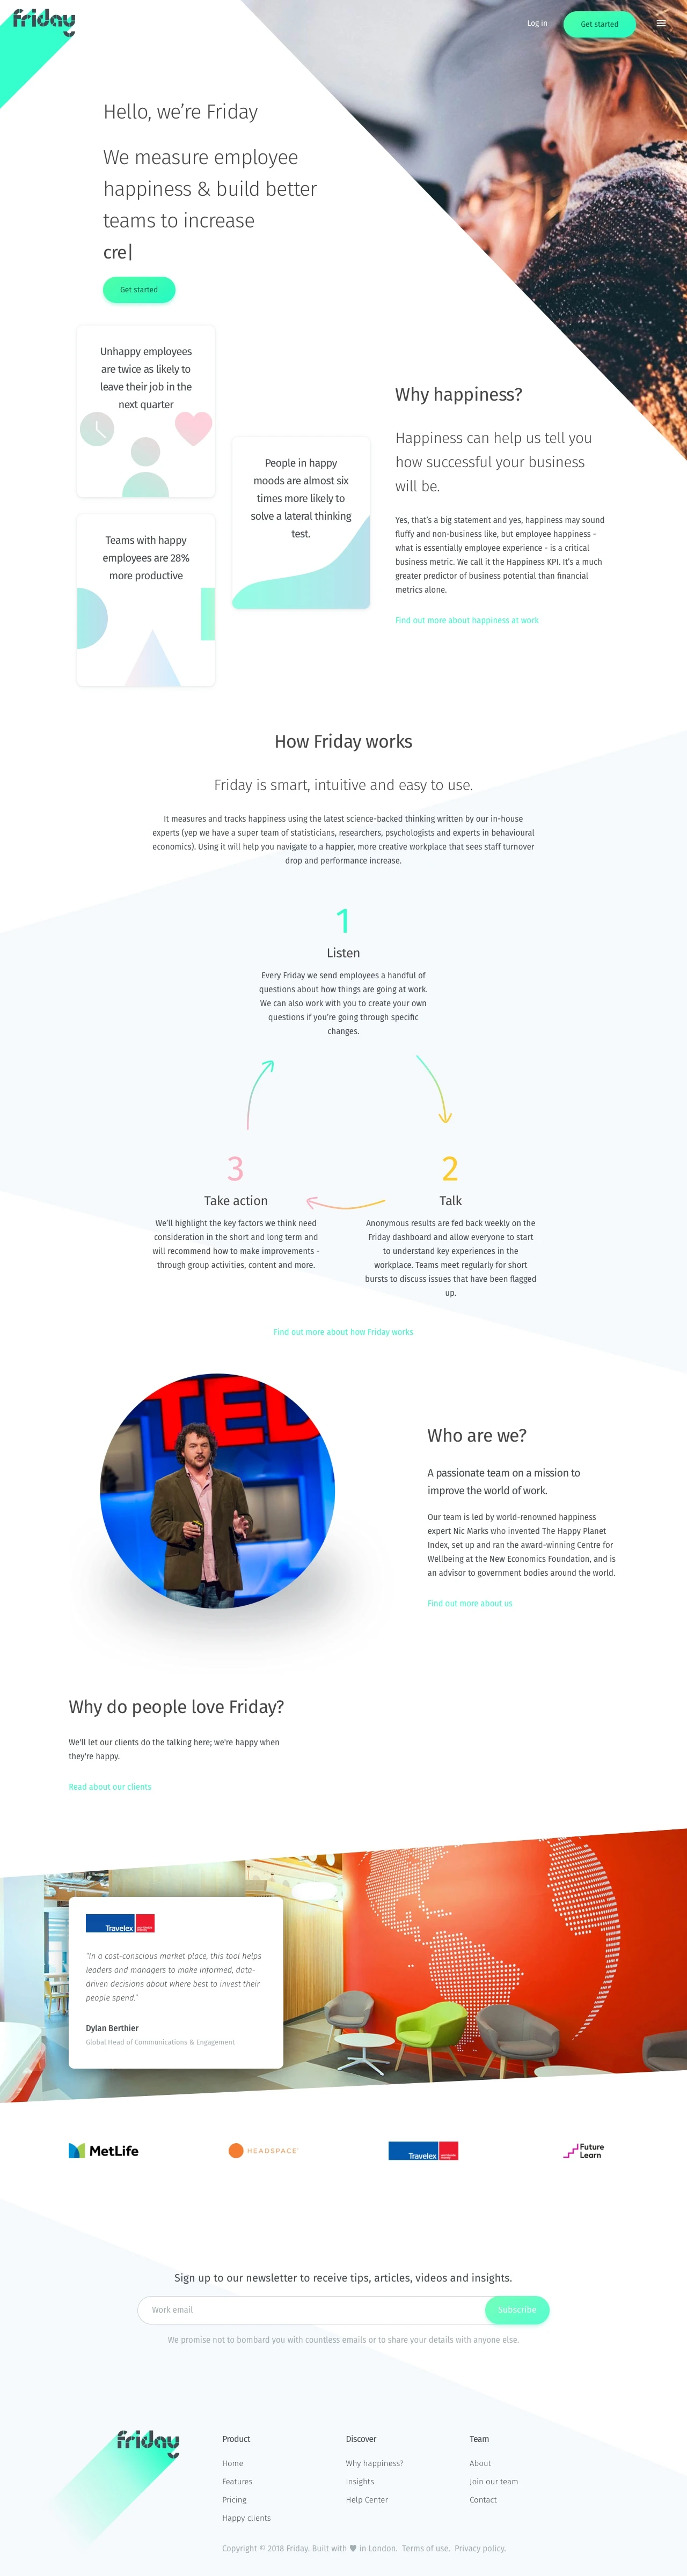 Friday Landing Page Example: We measure employee happiness & build better teams to increase creativity.